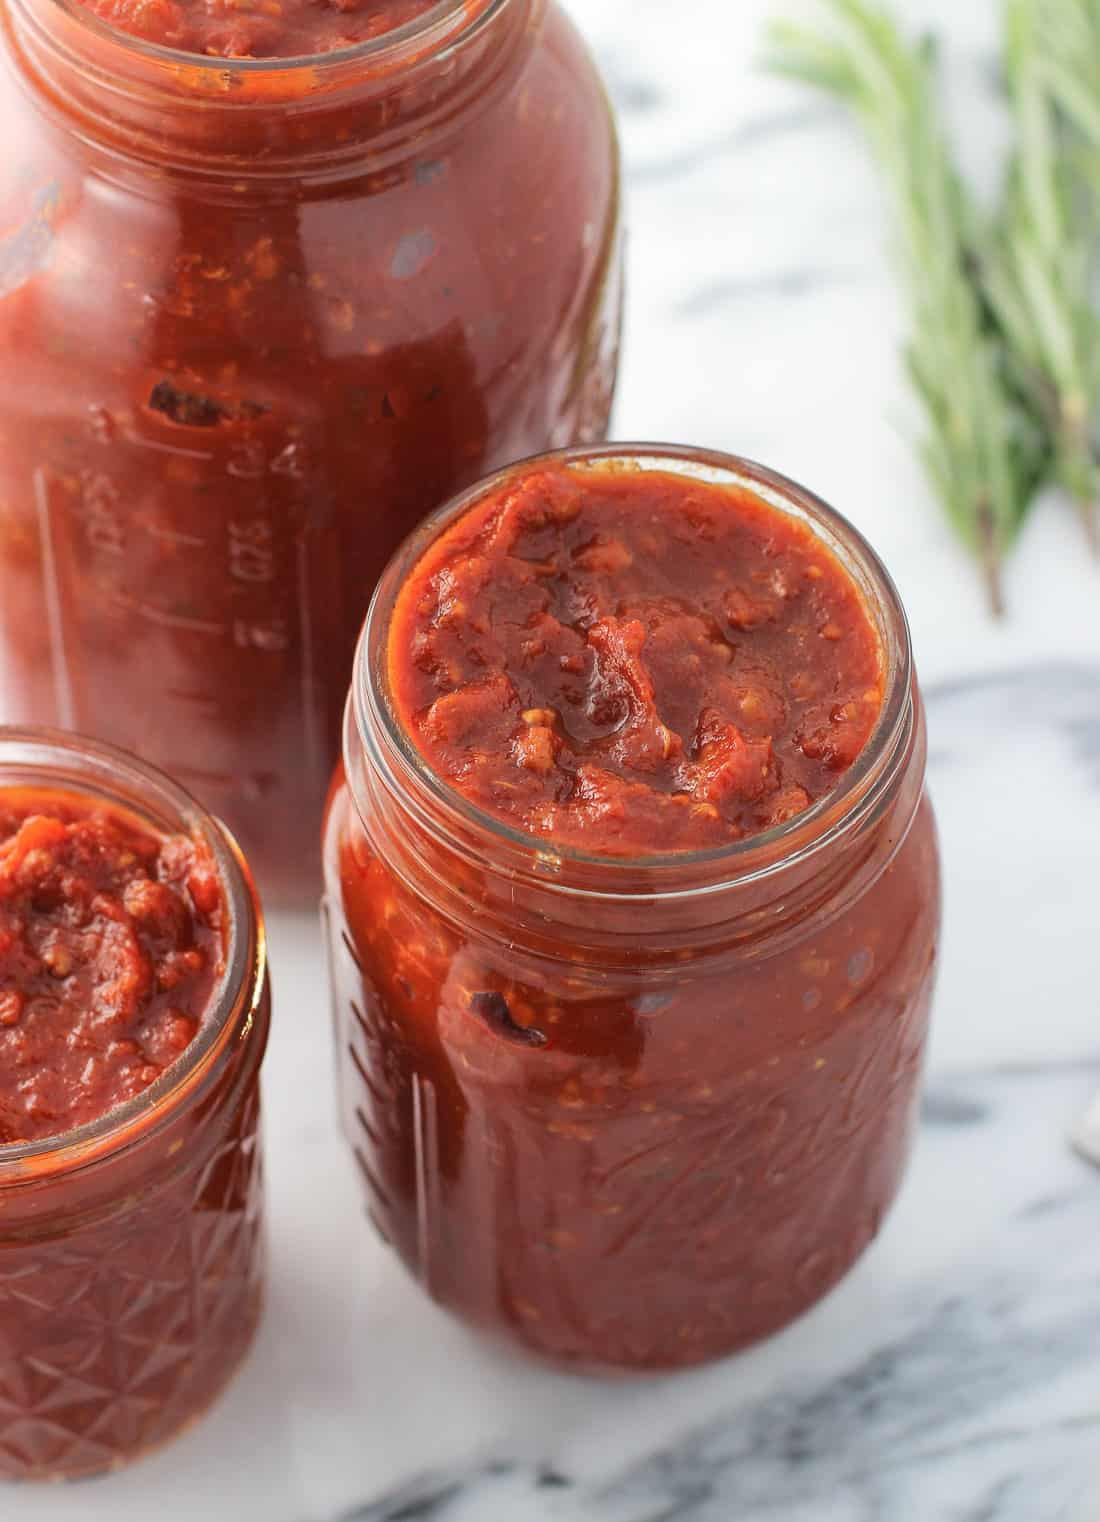 A close-up of a medium glass jar filled with sauce, surrounded by a larger and smaller jar